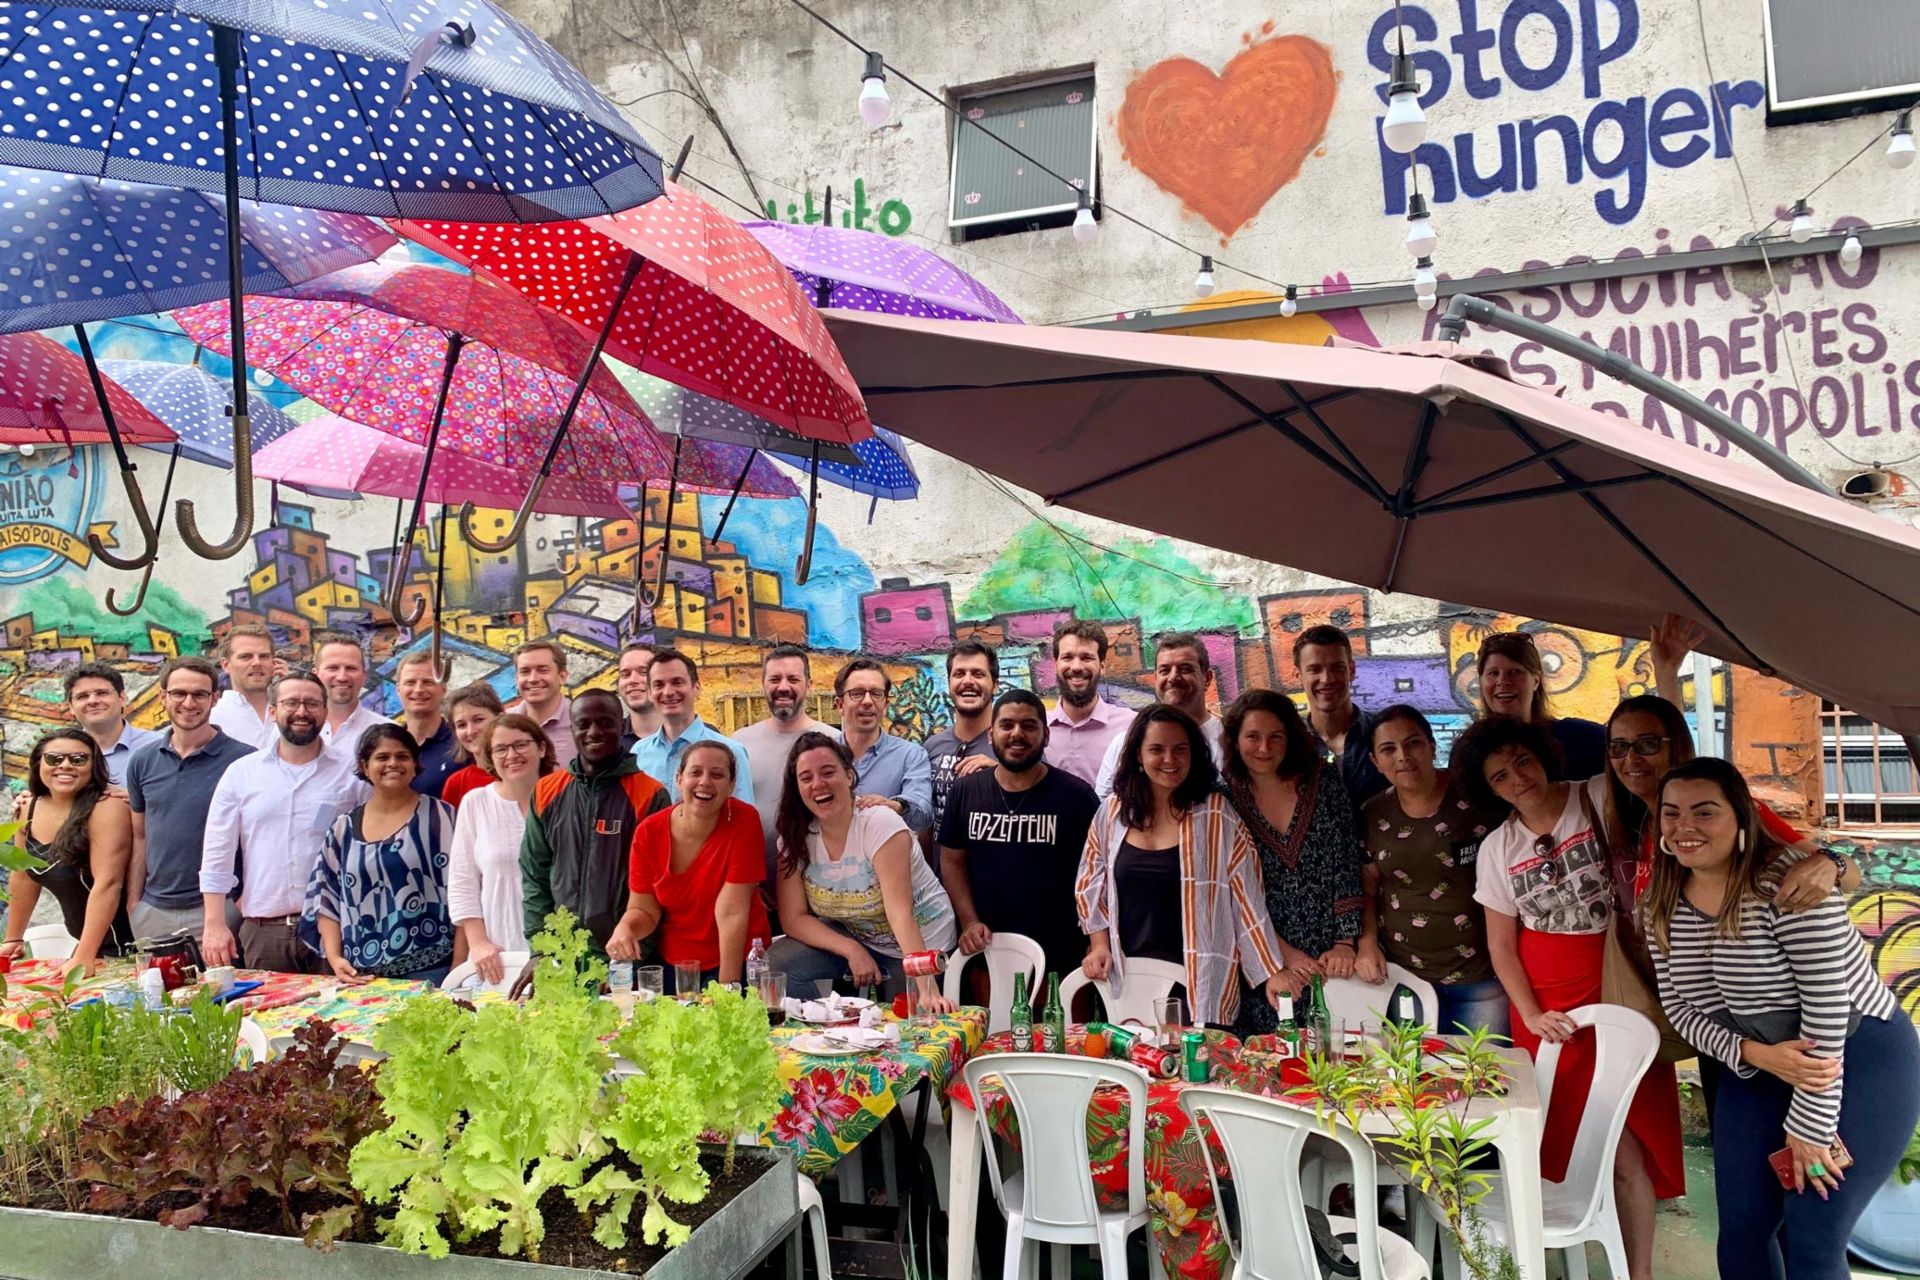 The participants visited one of São Paulo’s favelas where they dove deeper into the local logistics challenges.